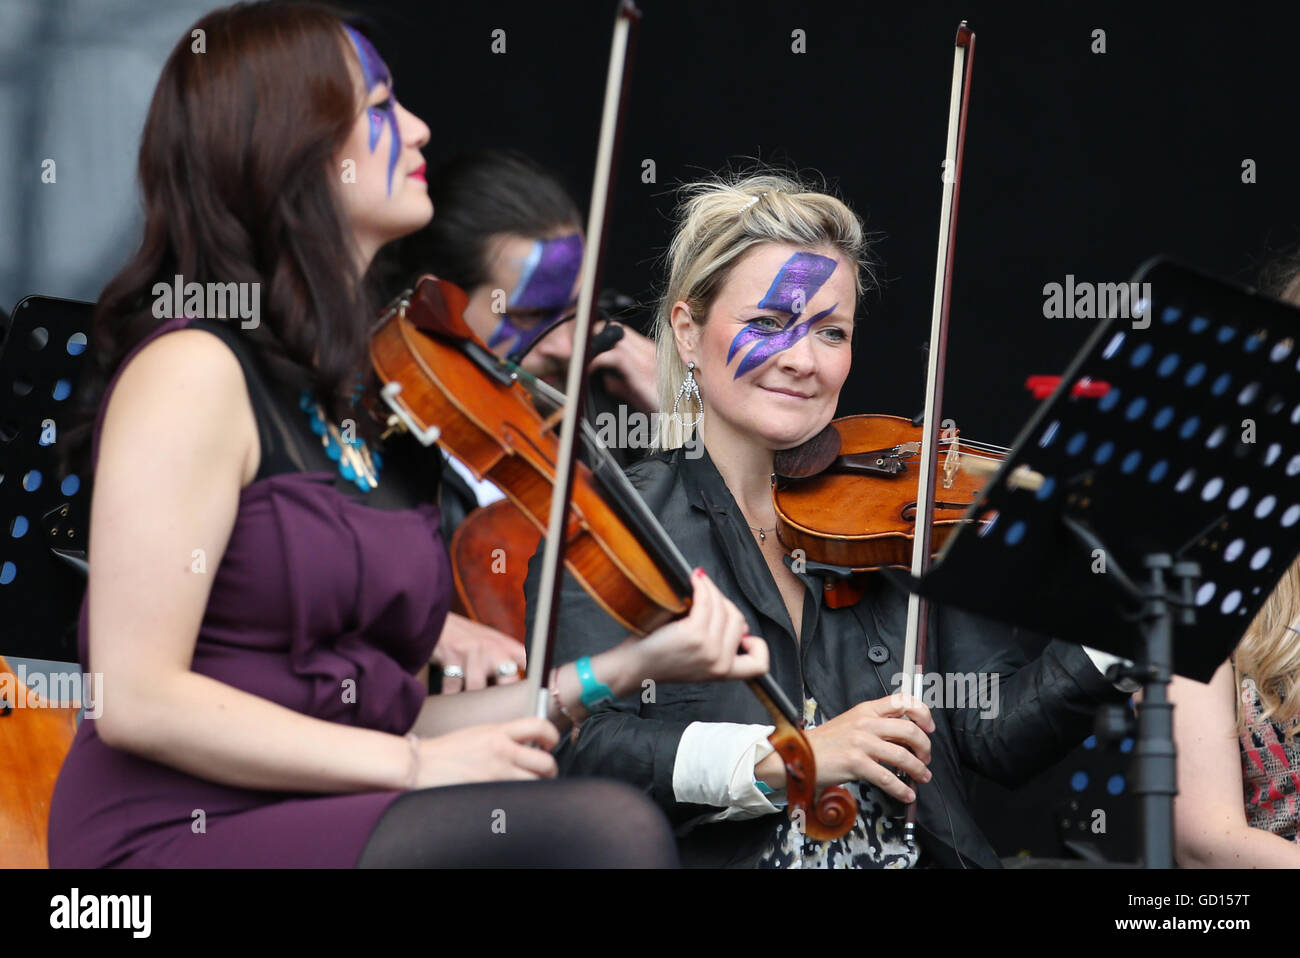 Members of the Rogue Orchestra with faces painted like Ziggy Stardust perform a David Bowie tribute set on the main stage during the third day of T in the Park, the annual music festival held at Strathallan Castle, Perthshire. Stock Photo